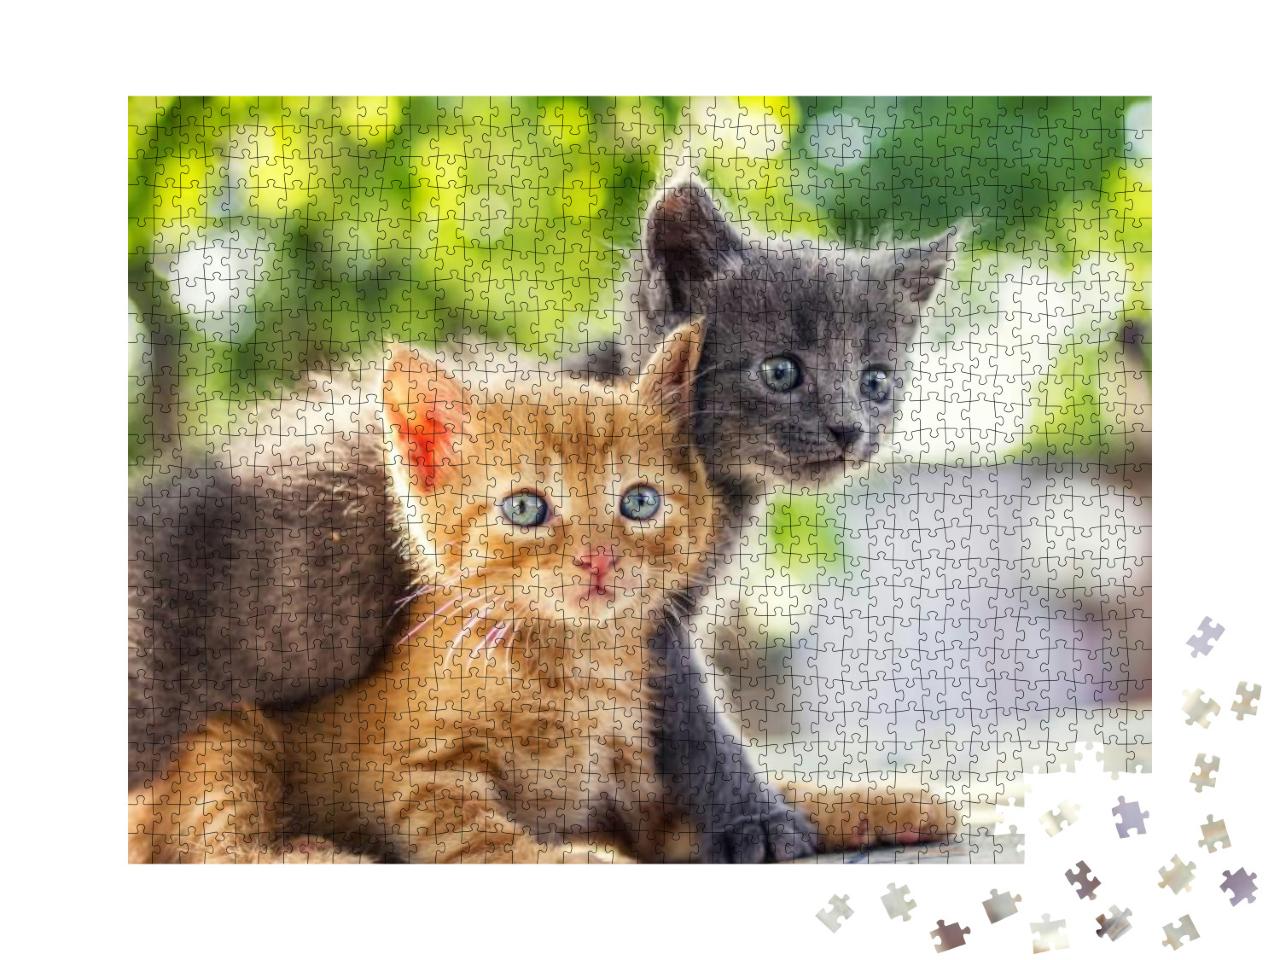 Two Adorable Kittens Playing Together. Kittens Outdoor... Jigsaw Puzzle with 1000 pieces